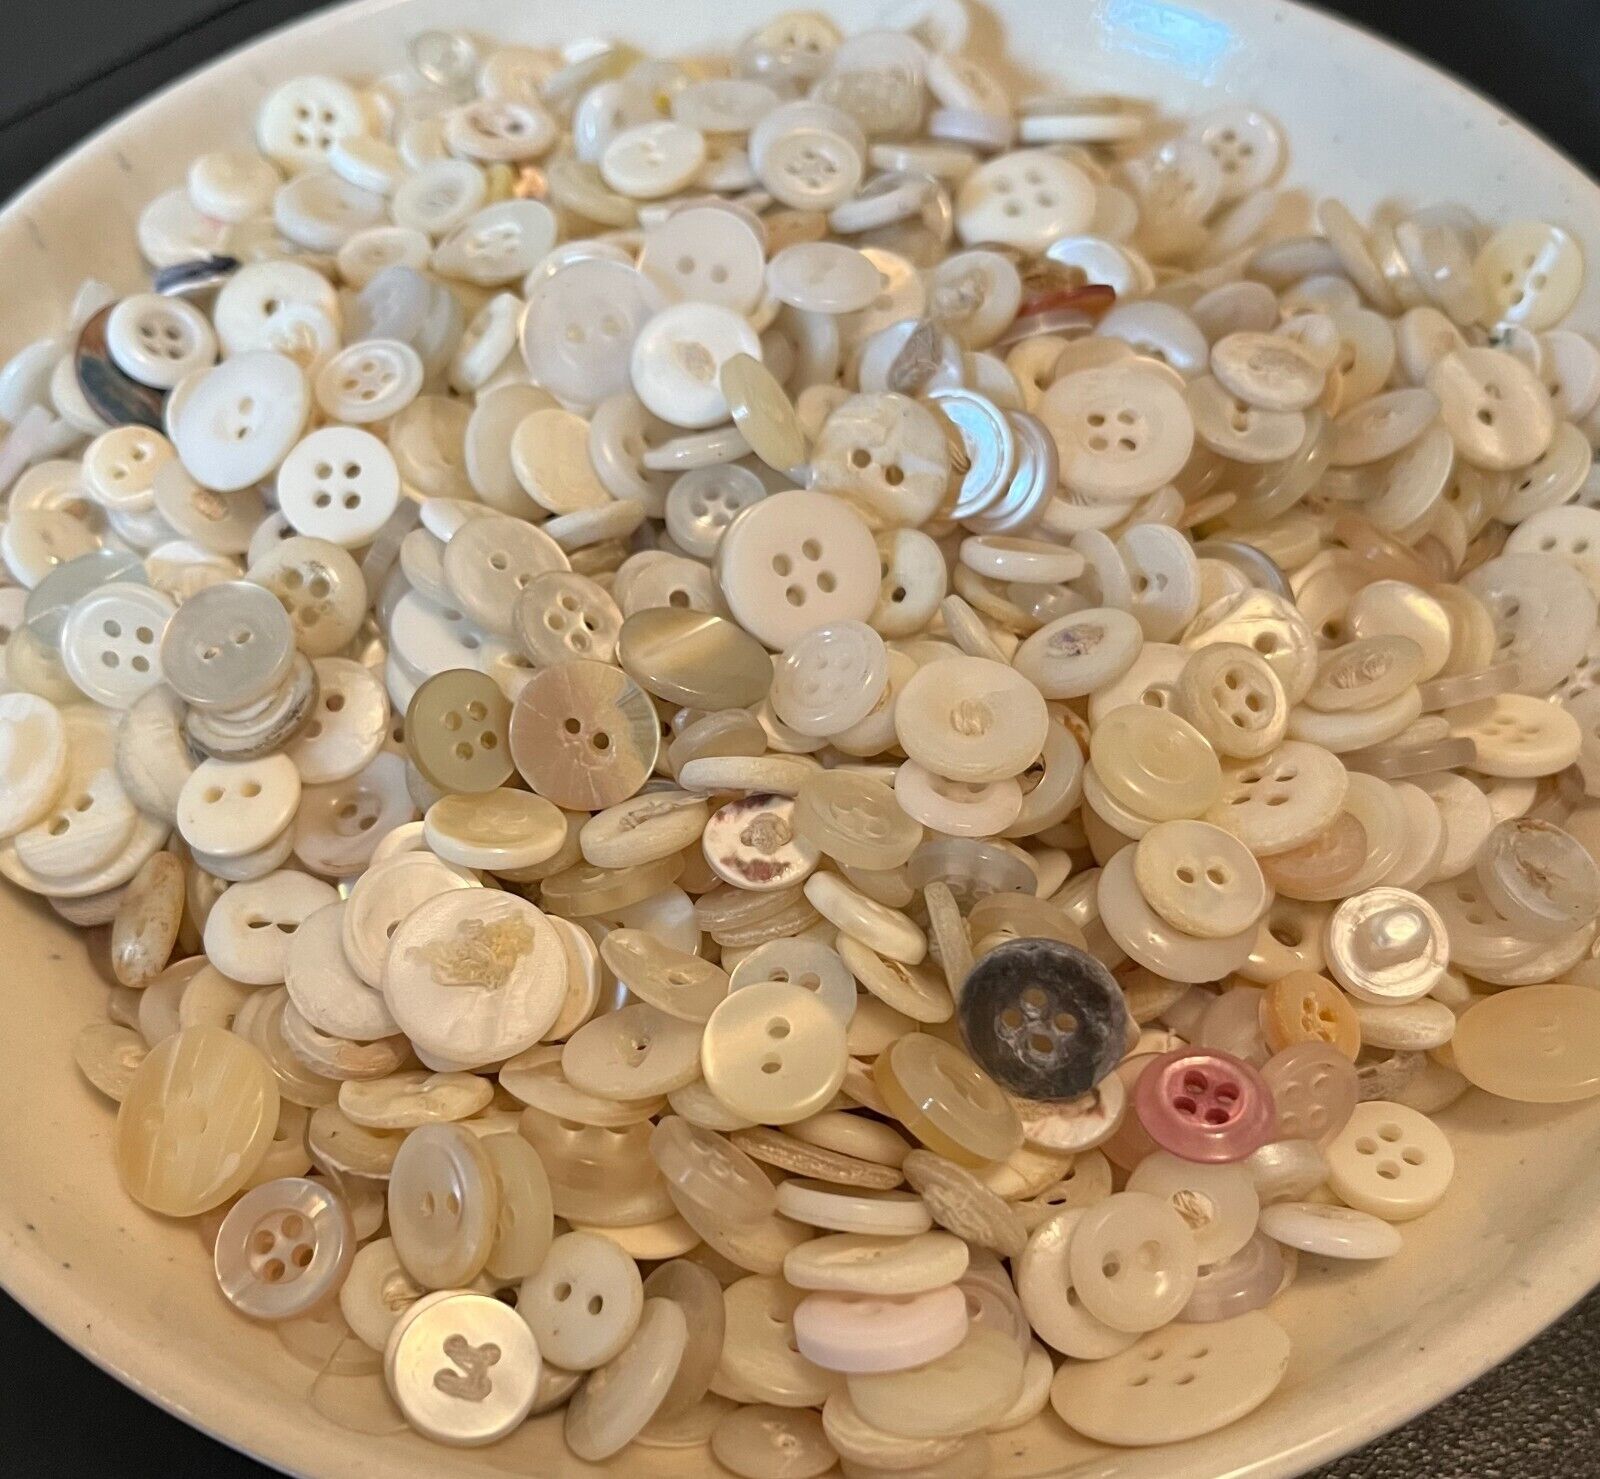 Lot of 200+ Vintage Small MOP Mother of Pearl Buttons Some Shank Art Crafts